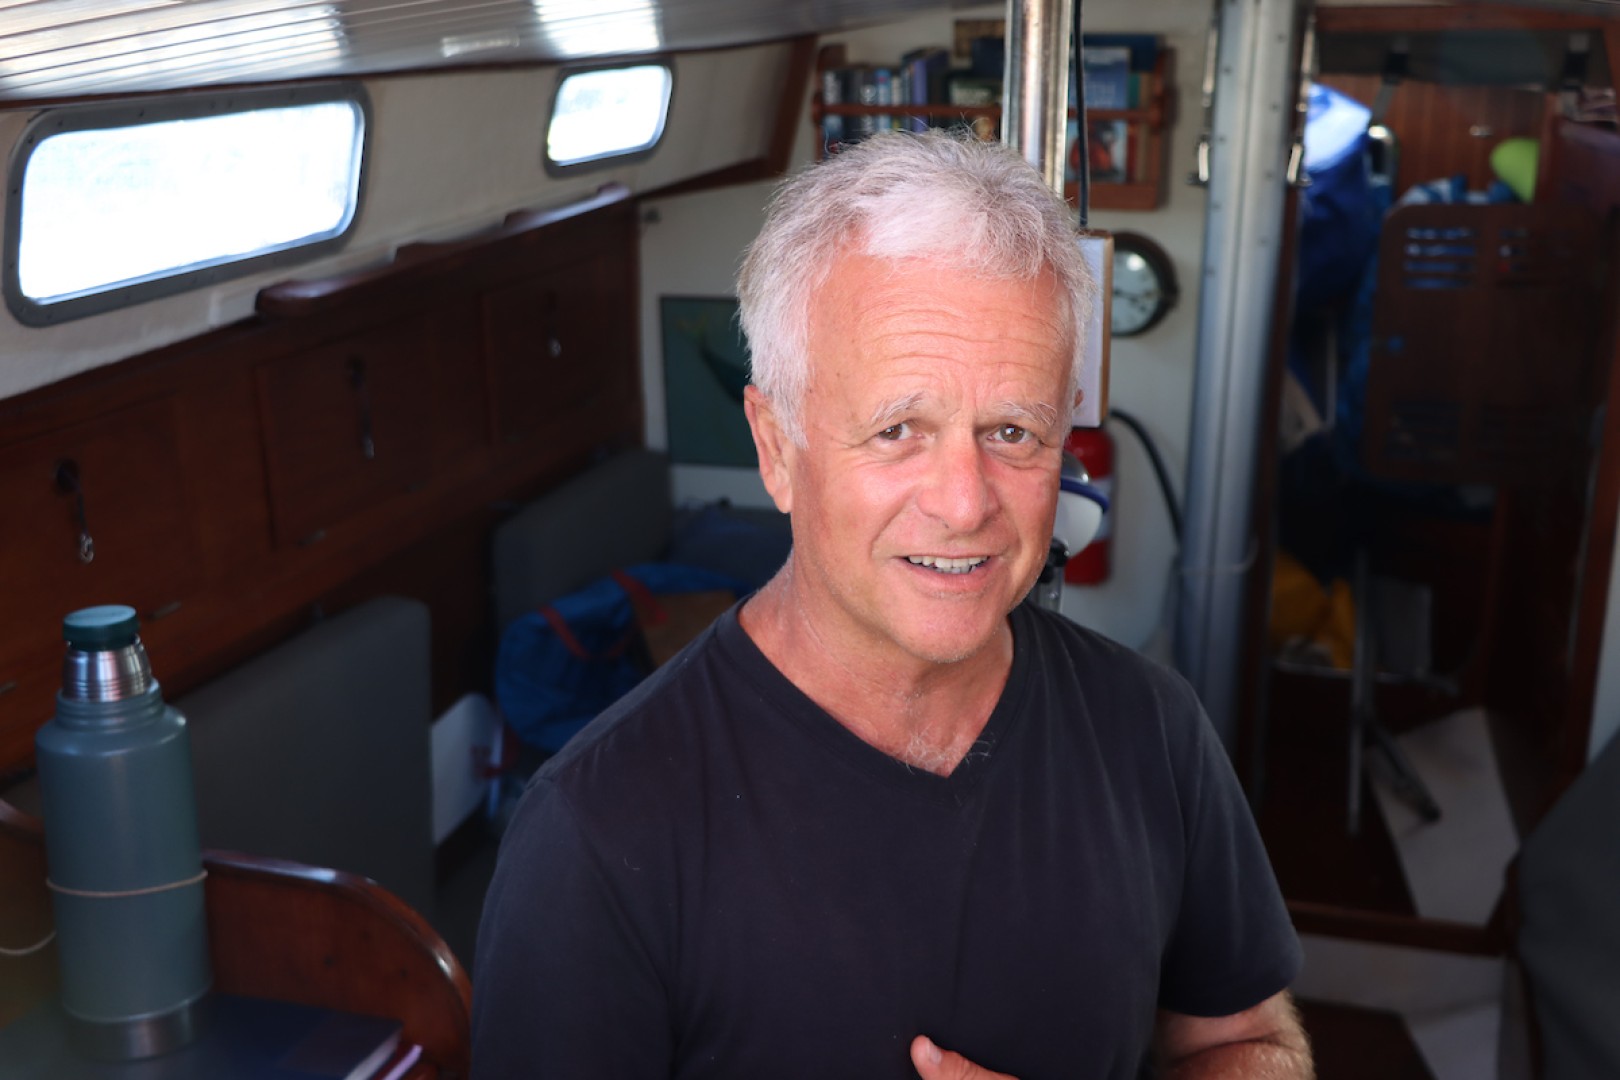 Skipper Jeremy Bagshaw onboard his yacht Olleanna. Credit: Nora Havel / GGR2022